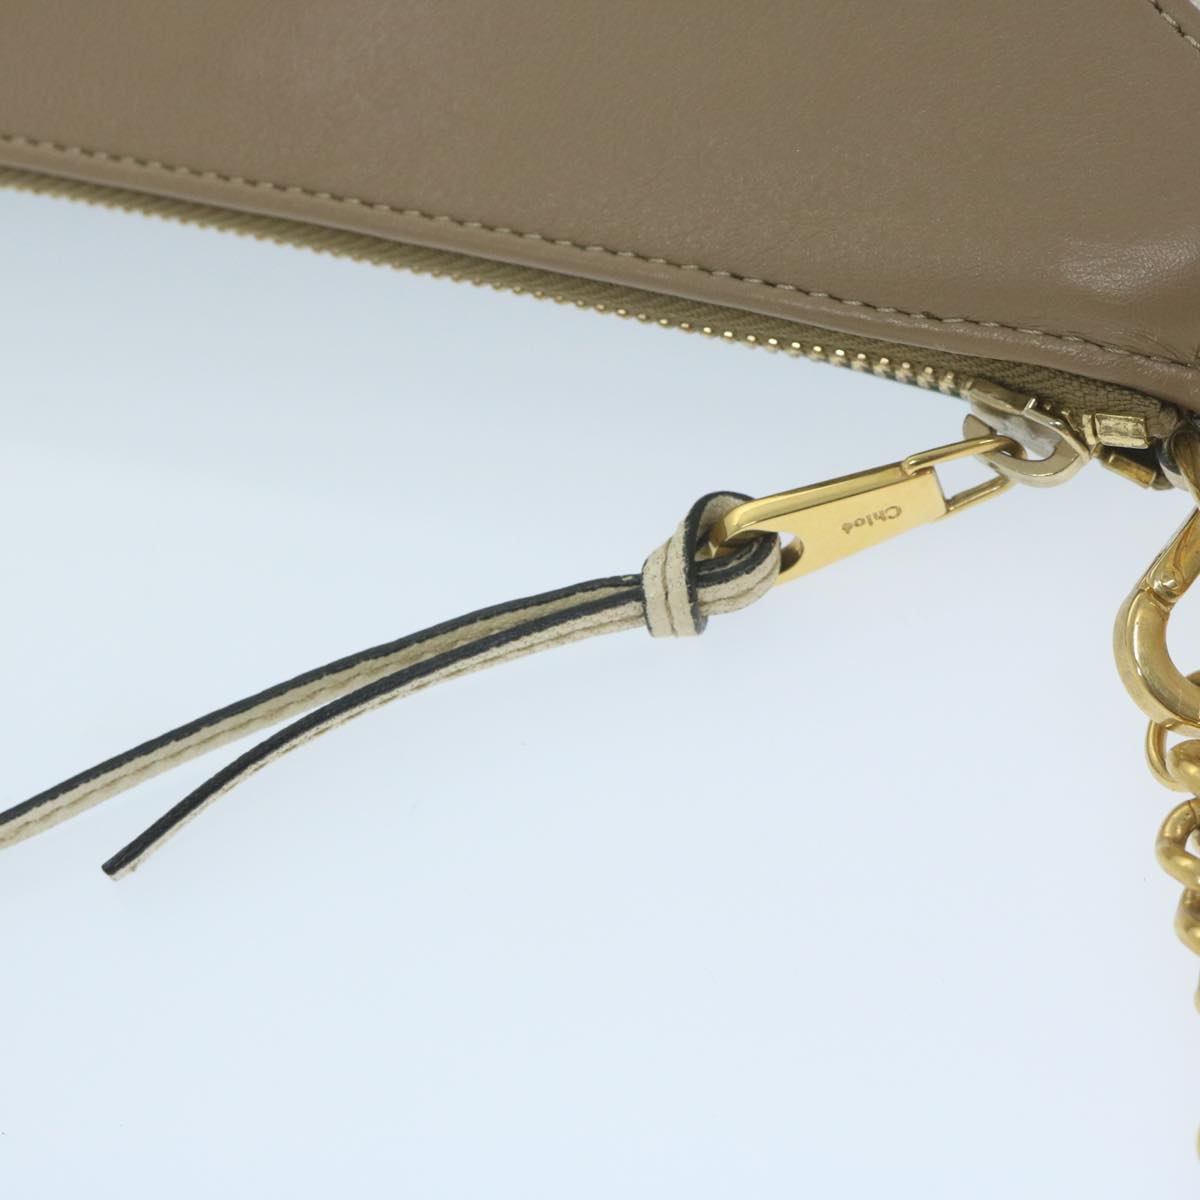 Chloe Chain Pouch Leather Green Auth 63662